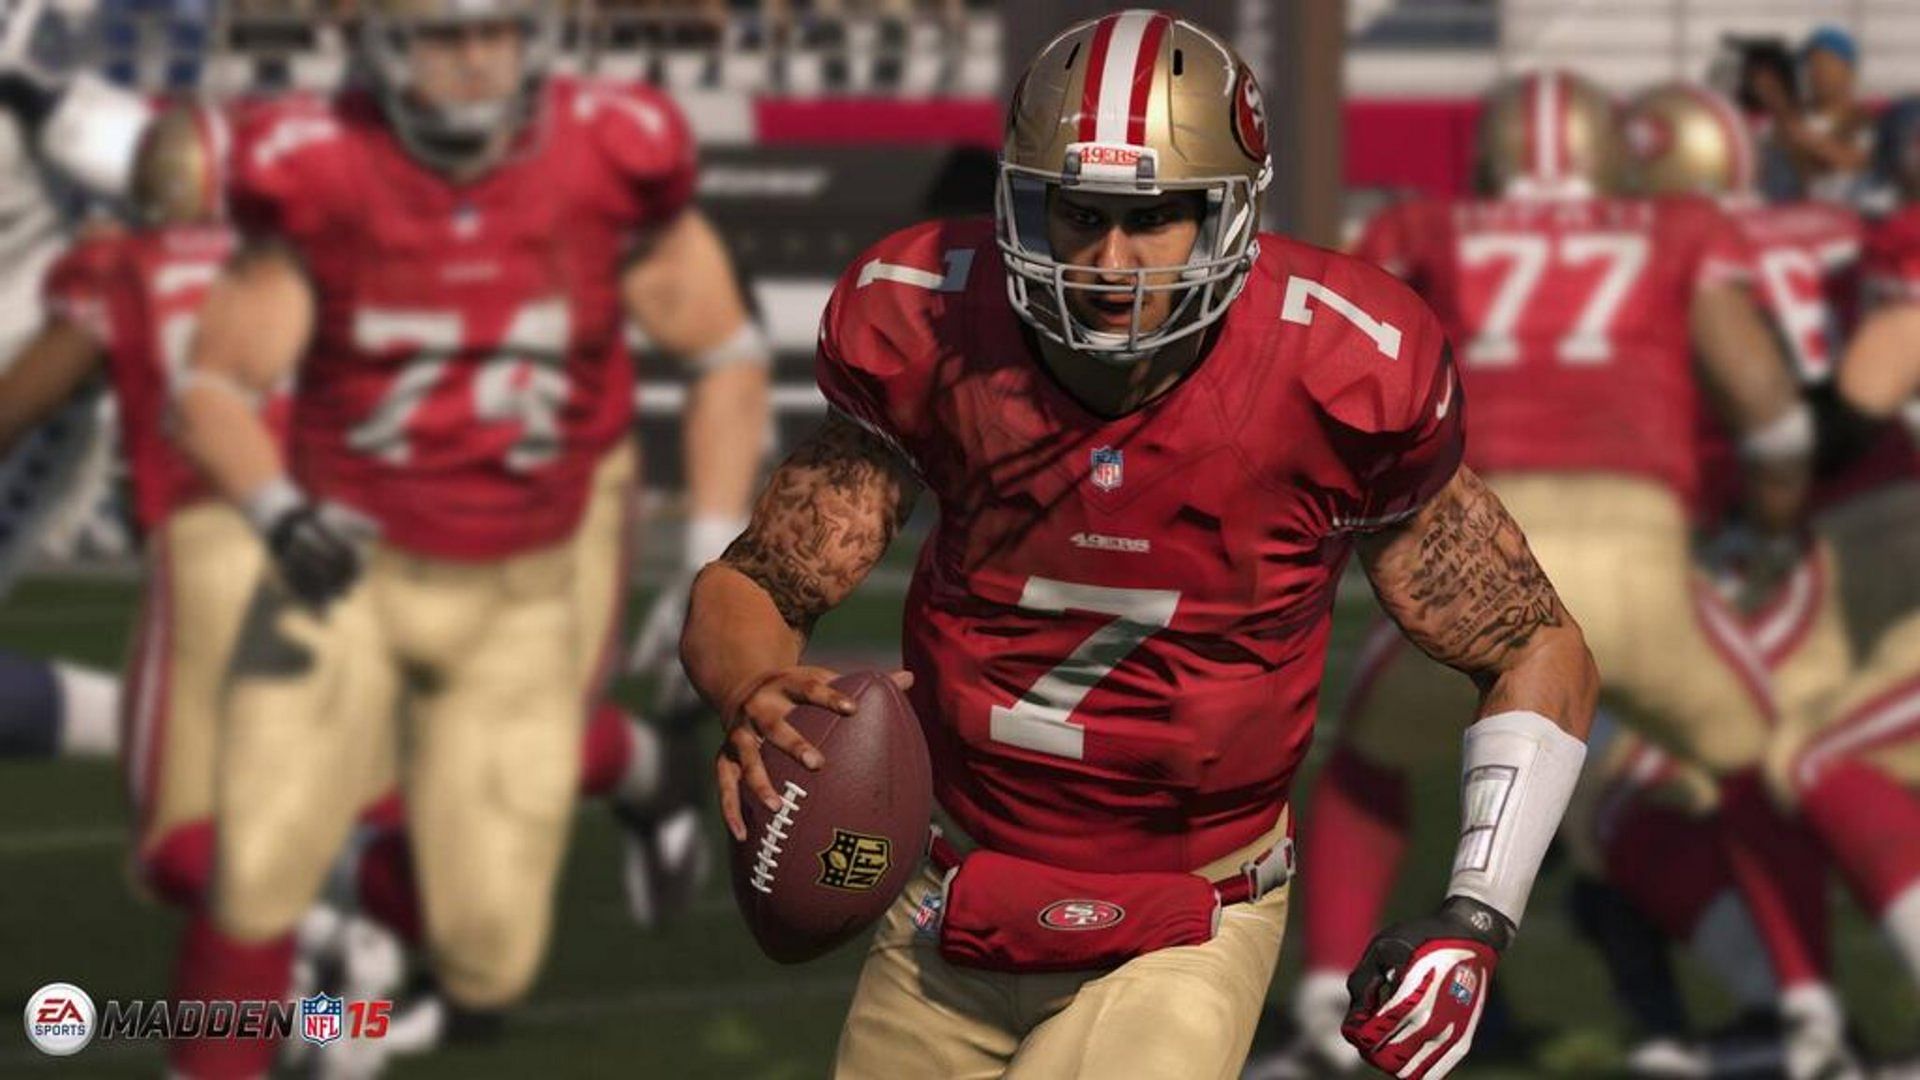 A shot from Madden NFL 15